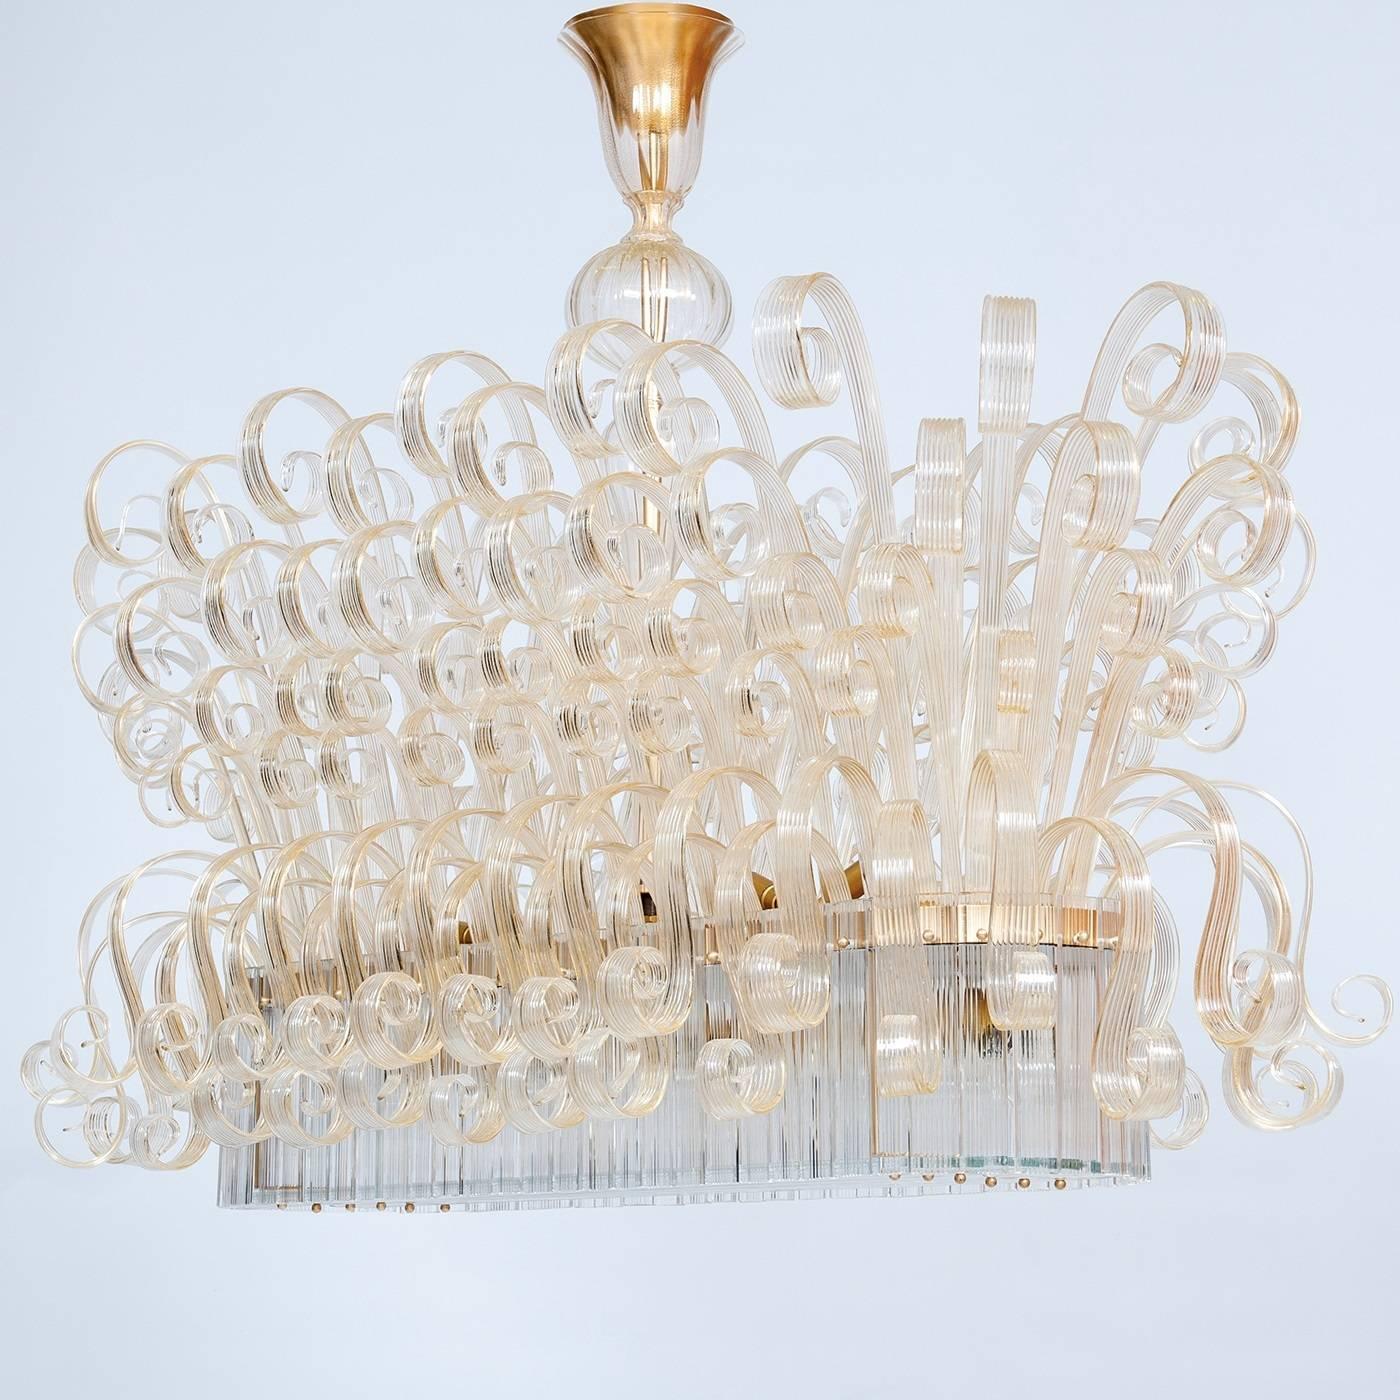 This incredible Venetian chandelier will bring a touch of luxury into any home in which it is placed. This limited edition piece features a 24-karat gold stem on top in its center which sits above by six tiers of ultra-thin hand-curled elements in